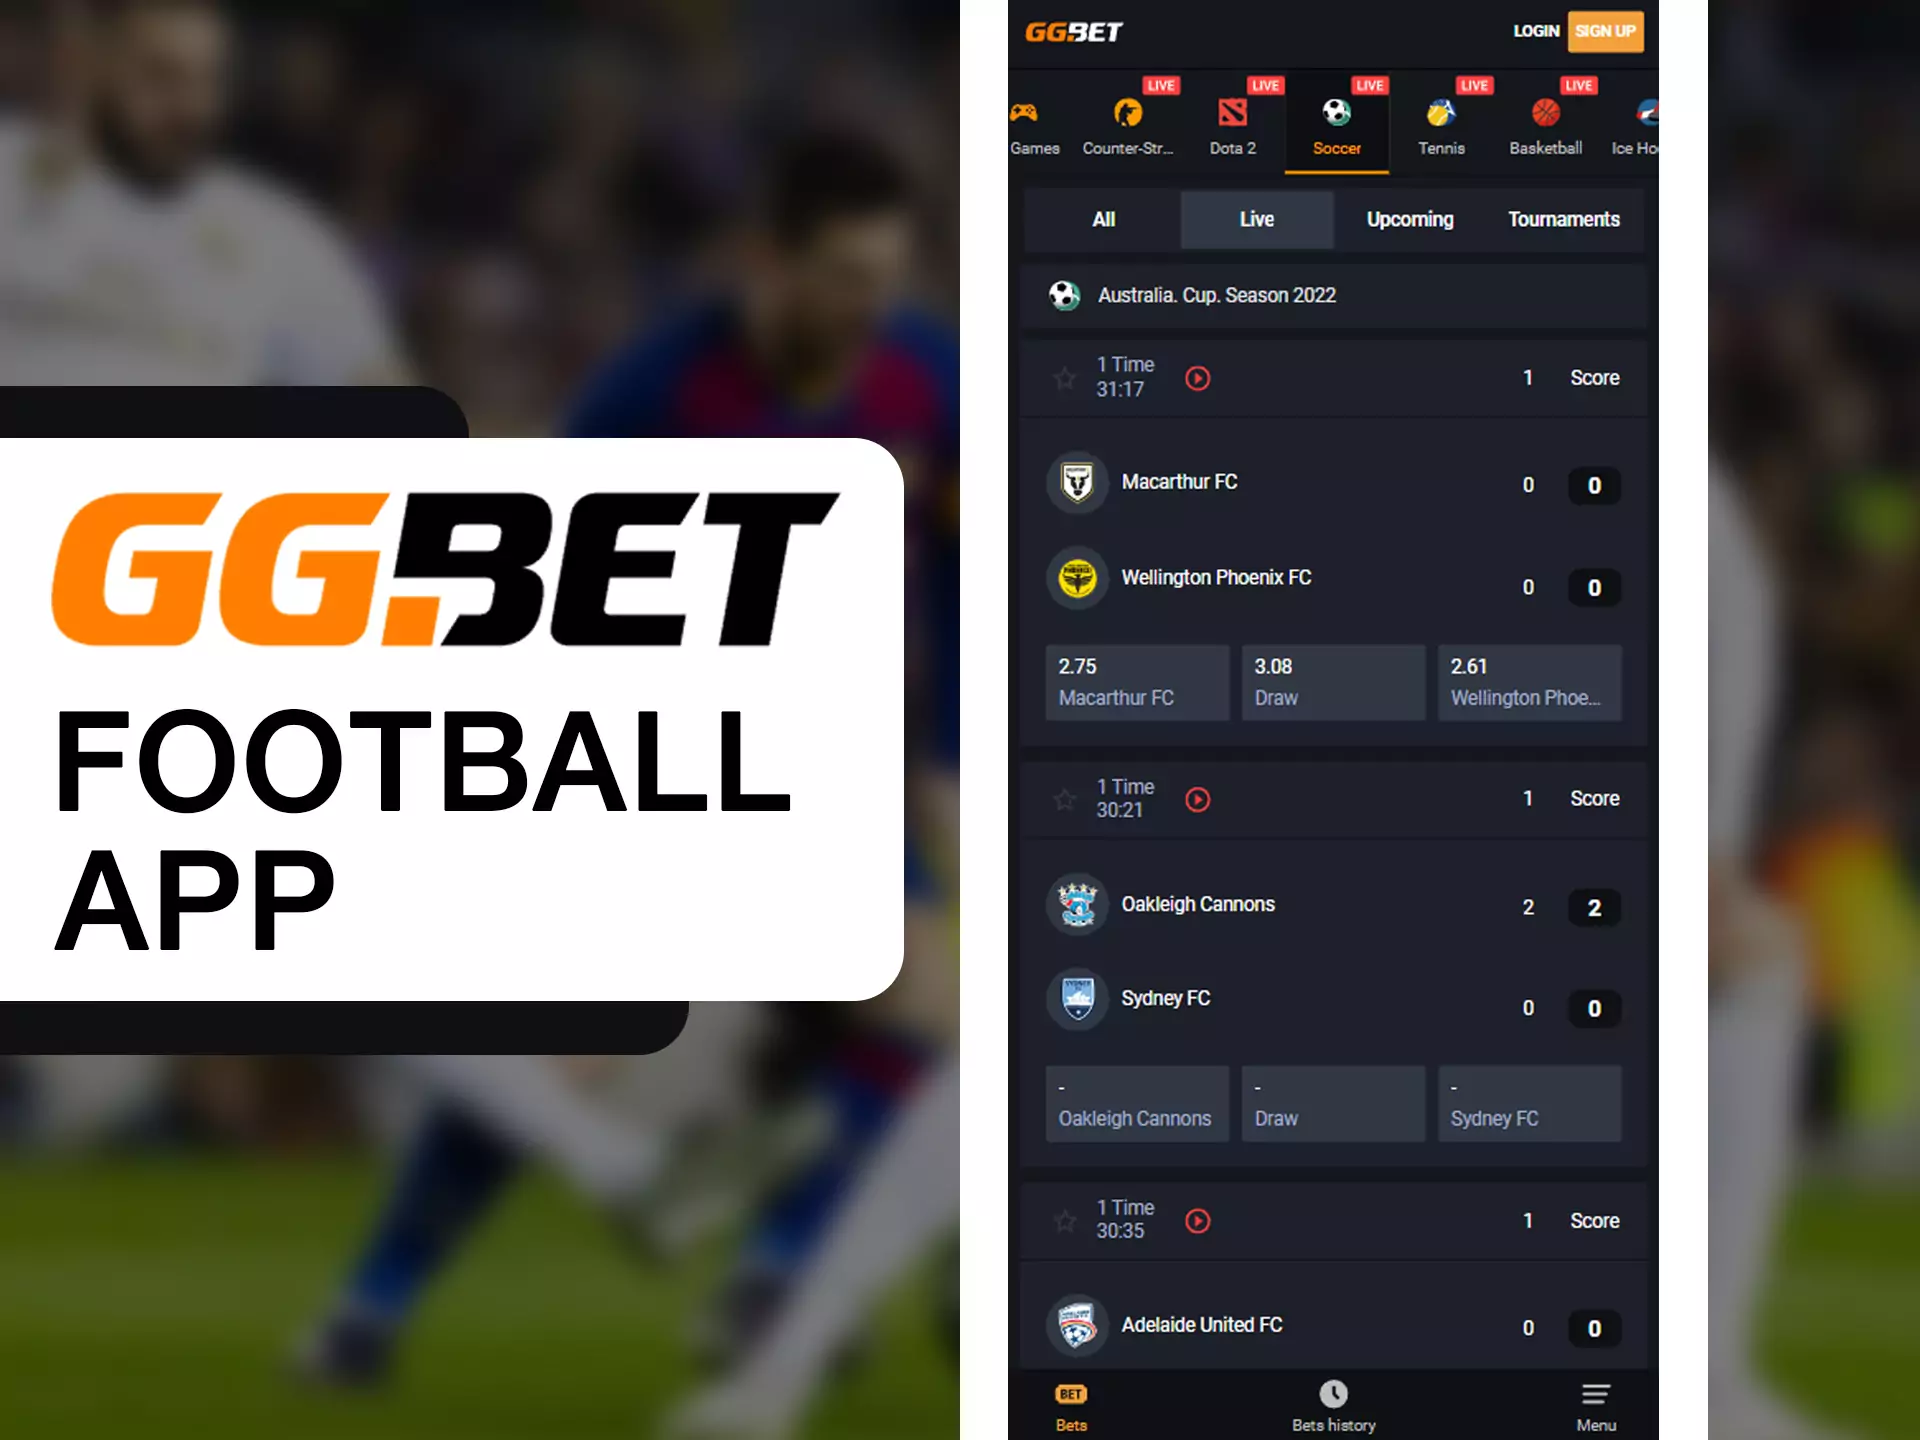 Watch how your favourite football team wins in GGBet app.